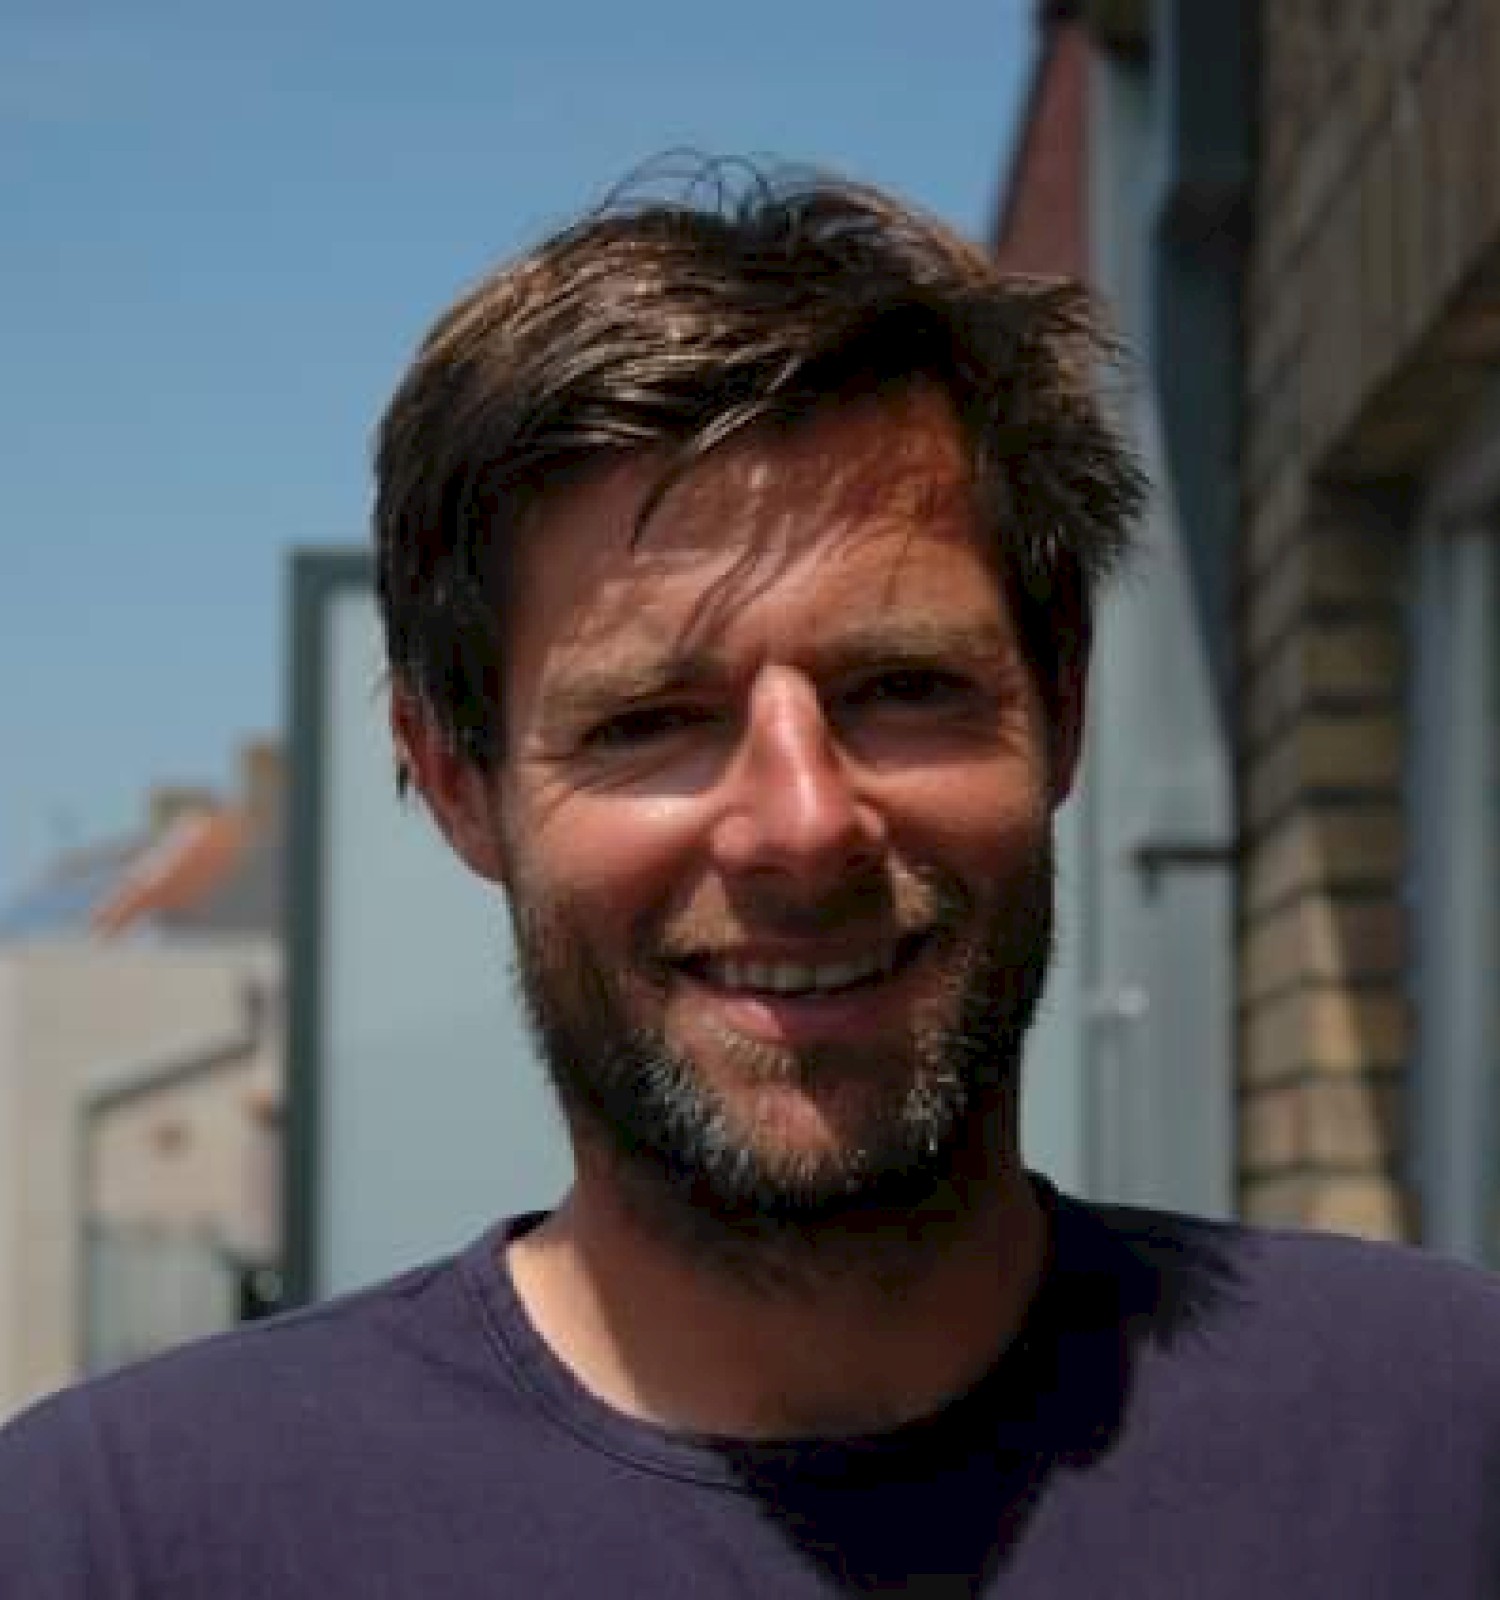 A man with brown hair and a beard smiles at the camera outside, standing near a brick building on a sunny day.